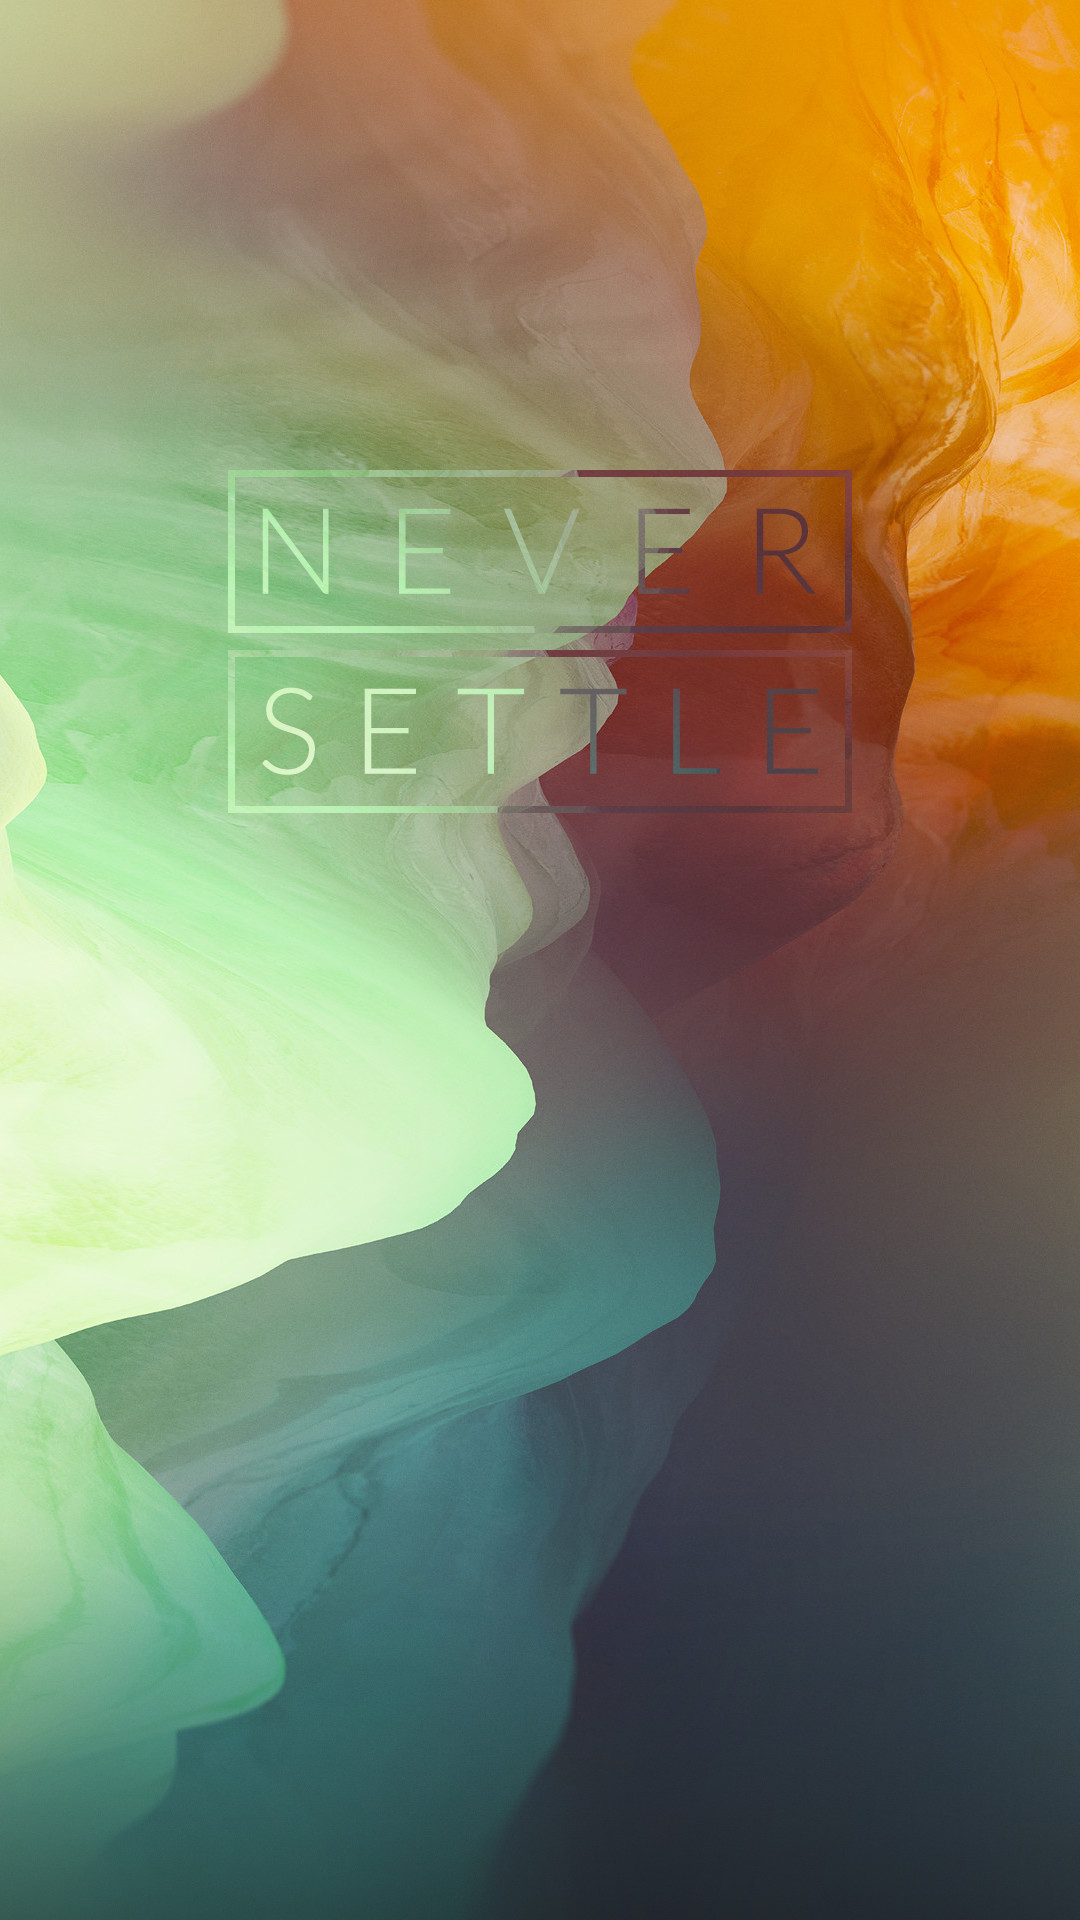 Oneplus Wallpapers 92 Images